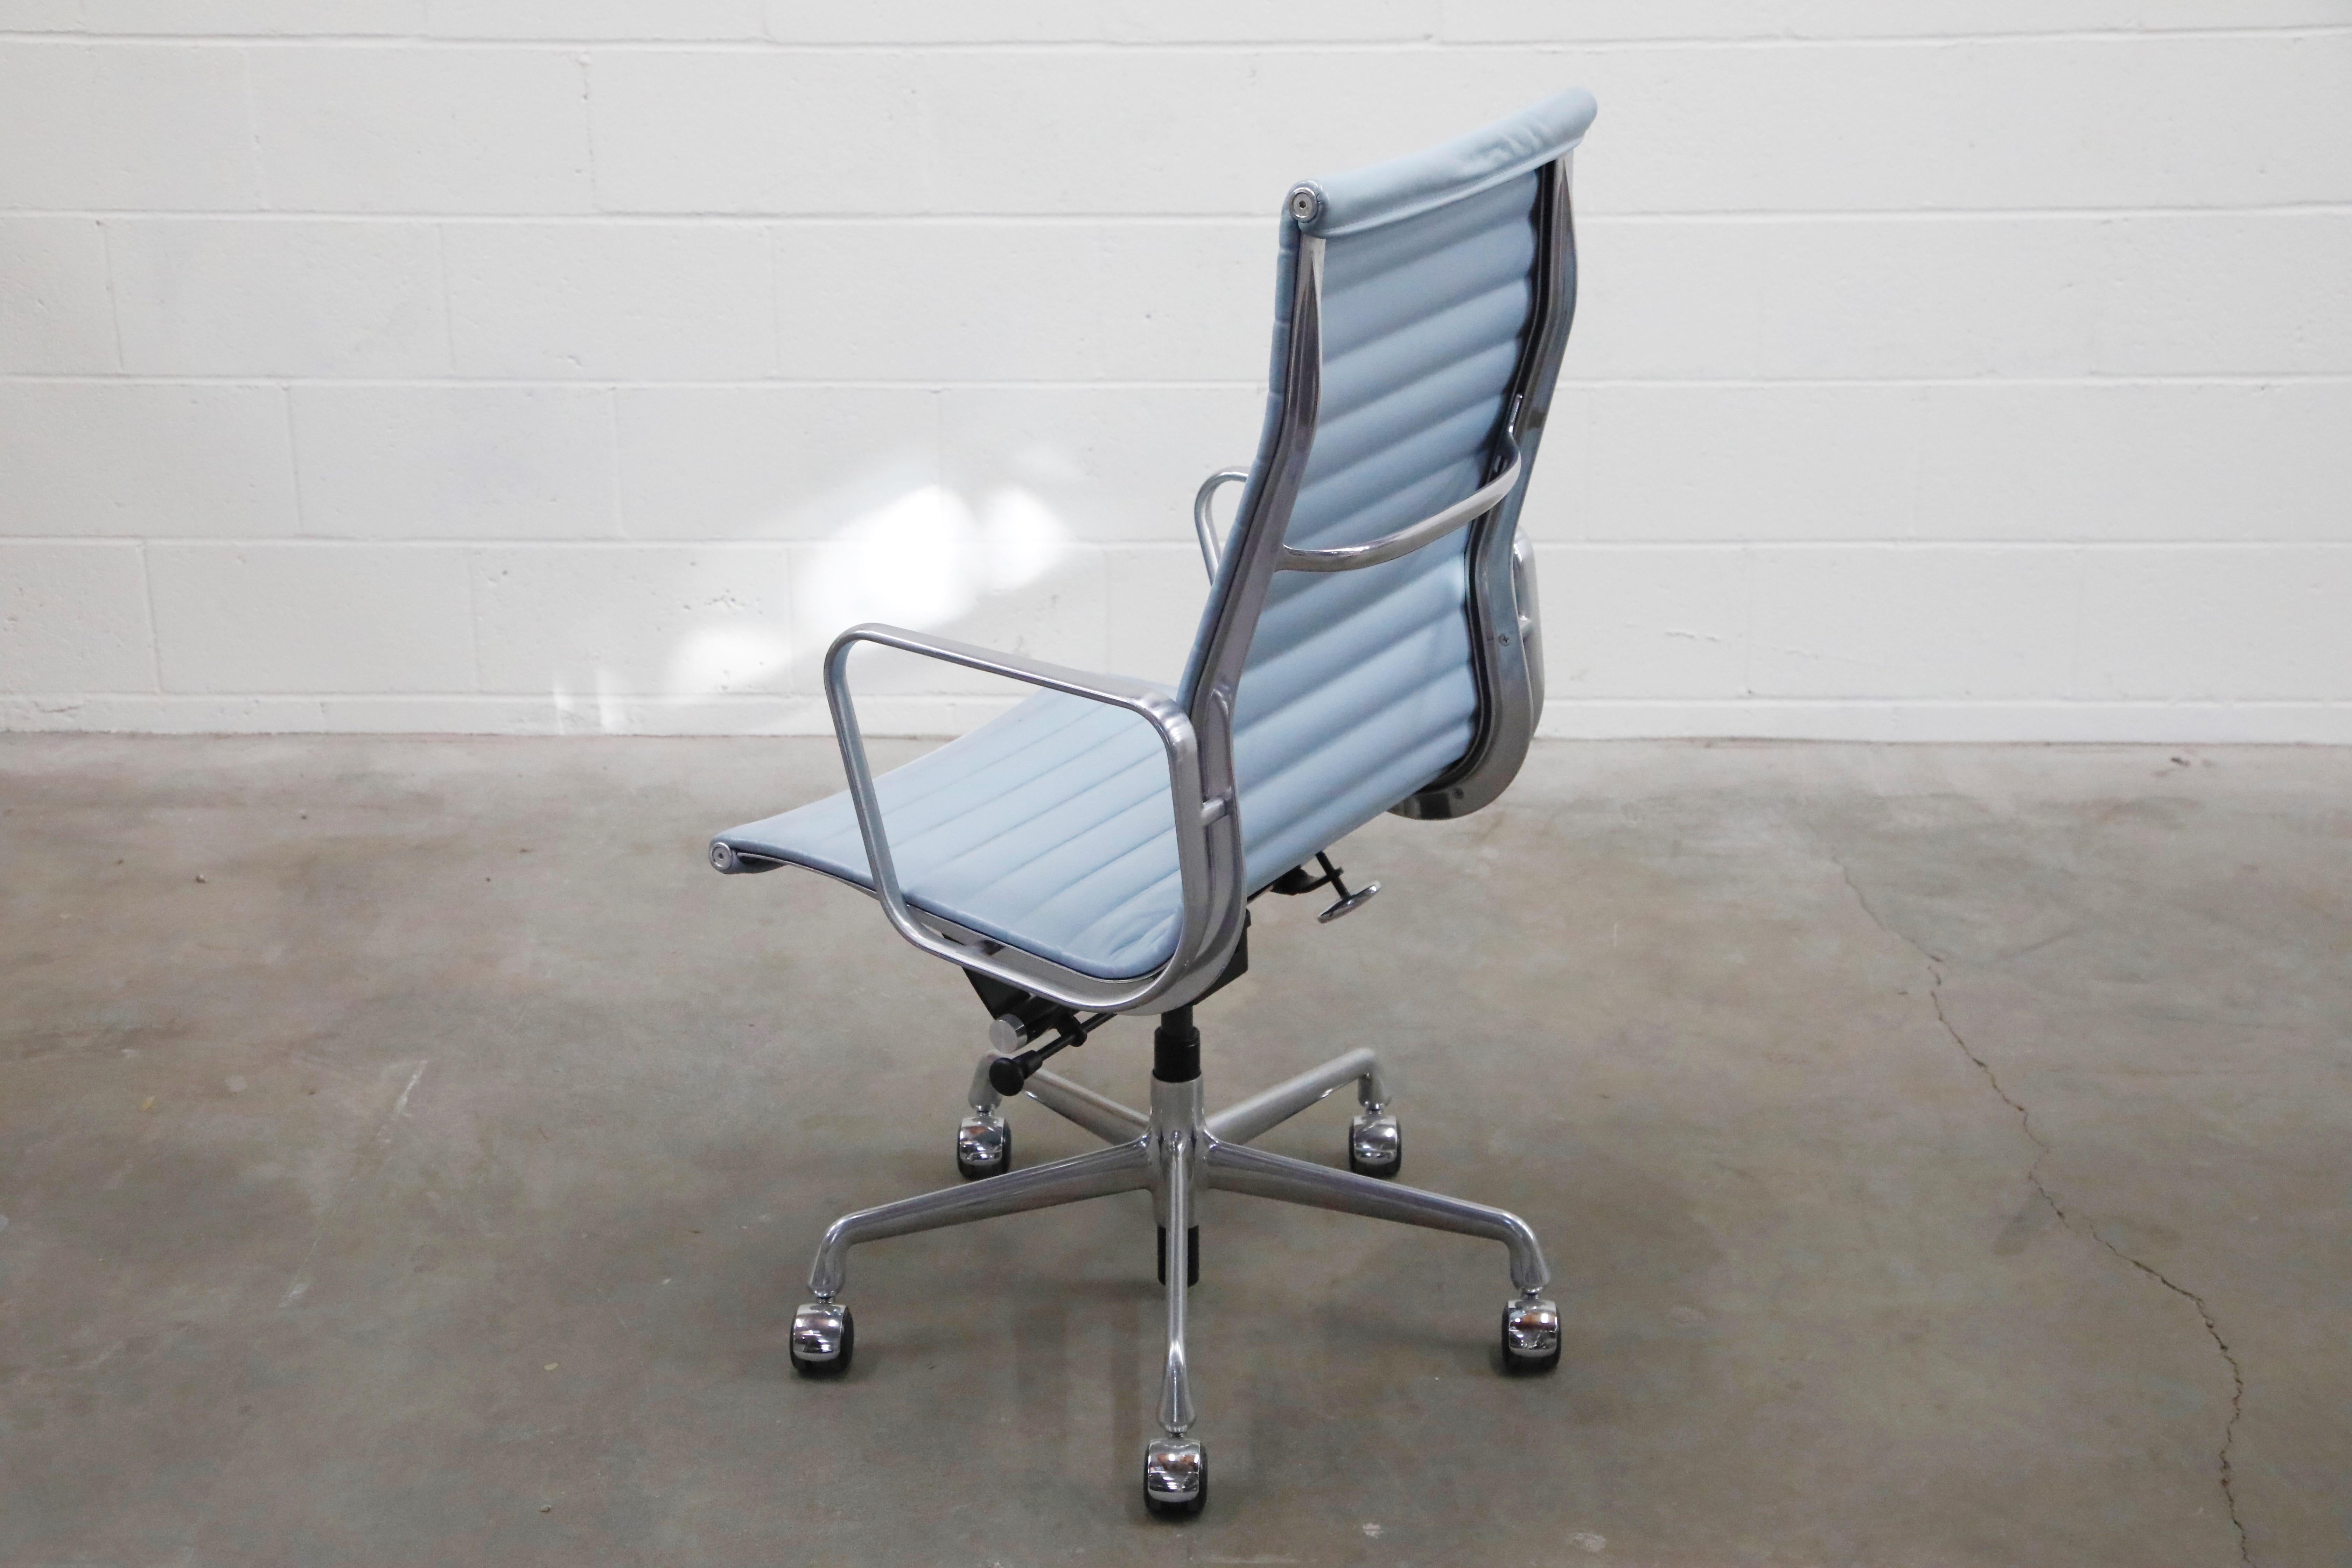 American Pneumatic Extended Lift Aluminum Group Executive Chair by Herman Miller, Signed